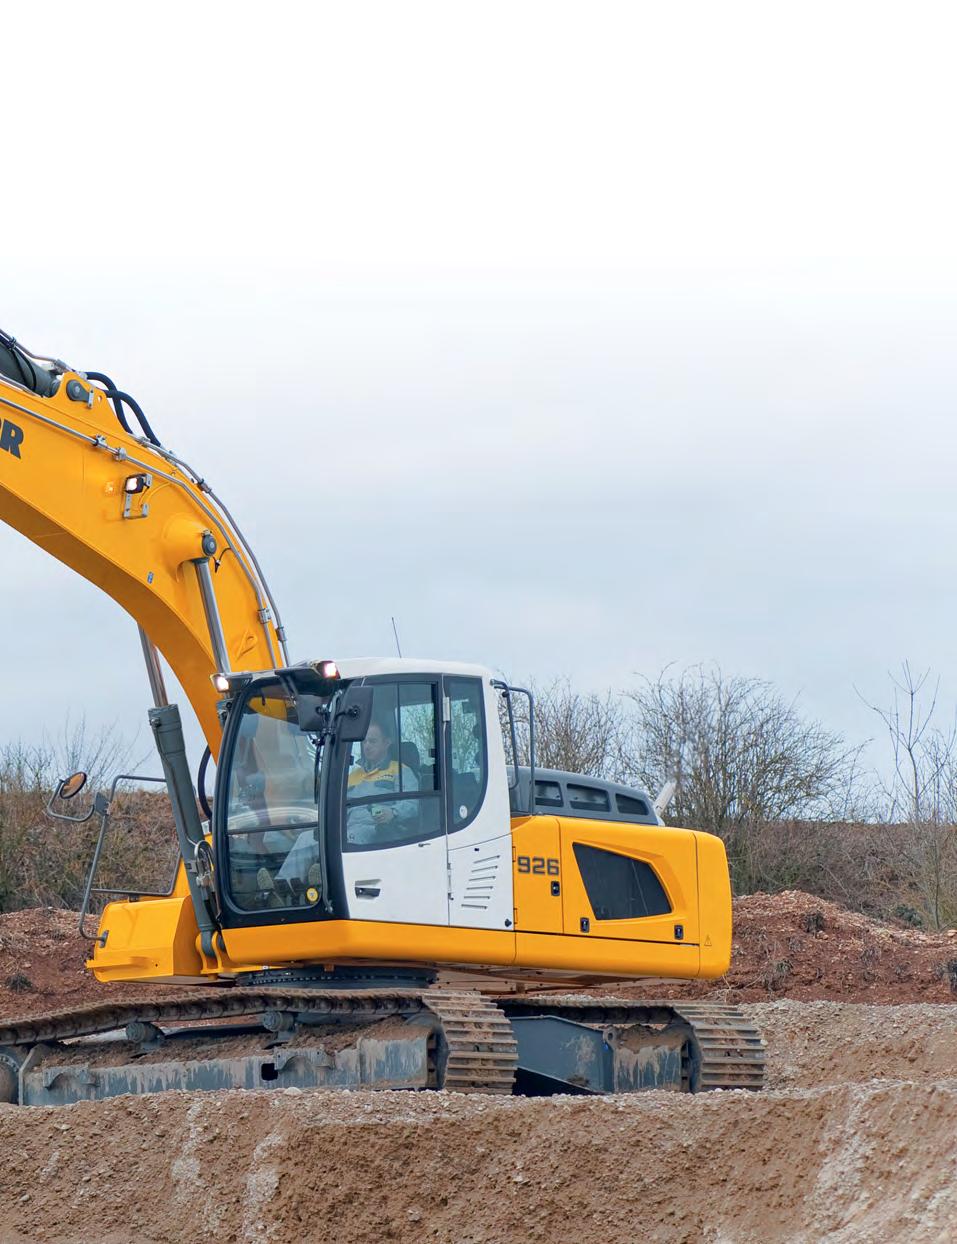 Performance The new R 926 crawler excavator is a high-performance machine which balances power, accuracy and efficiency in the most effective way.